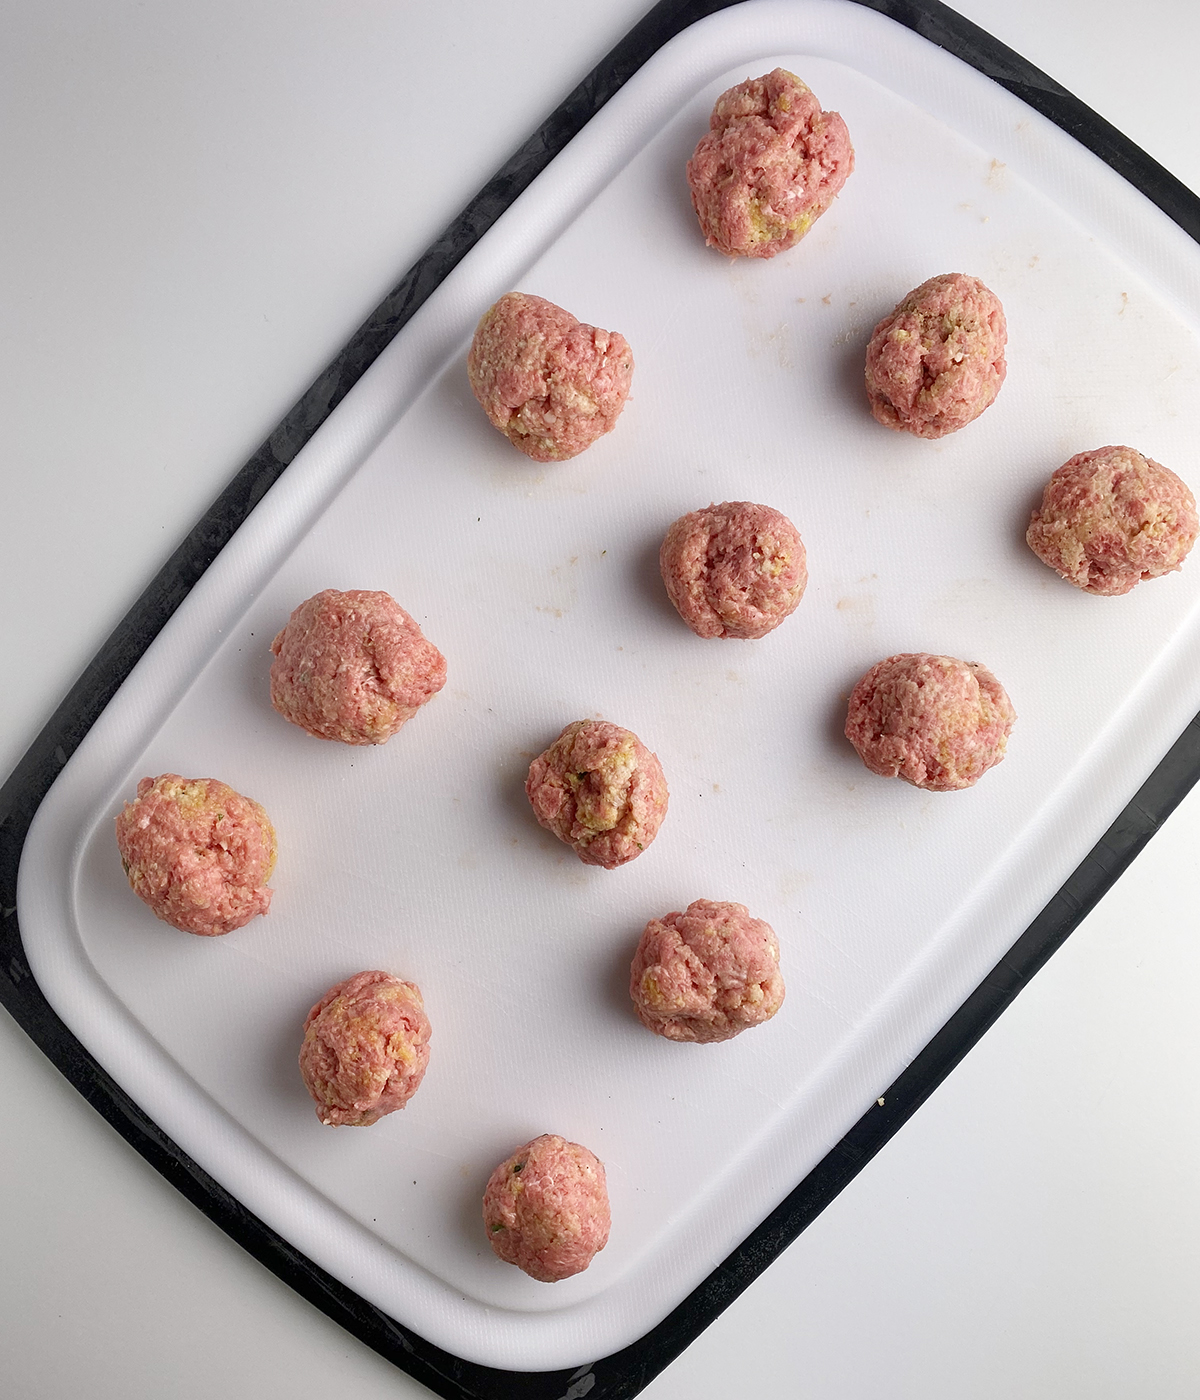 Rolled meatballs on a cutting board waiting to be cooked.